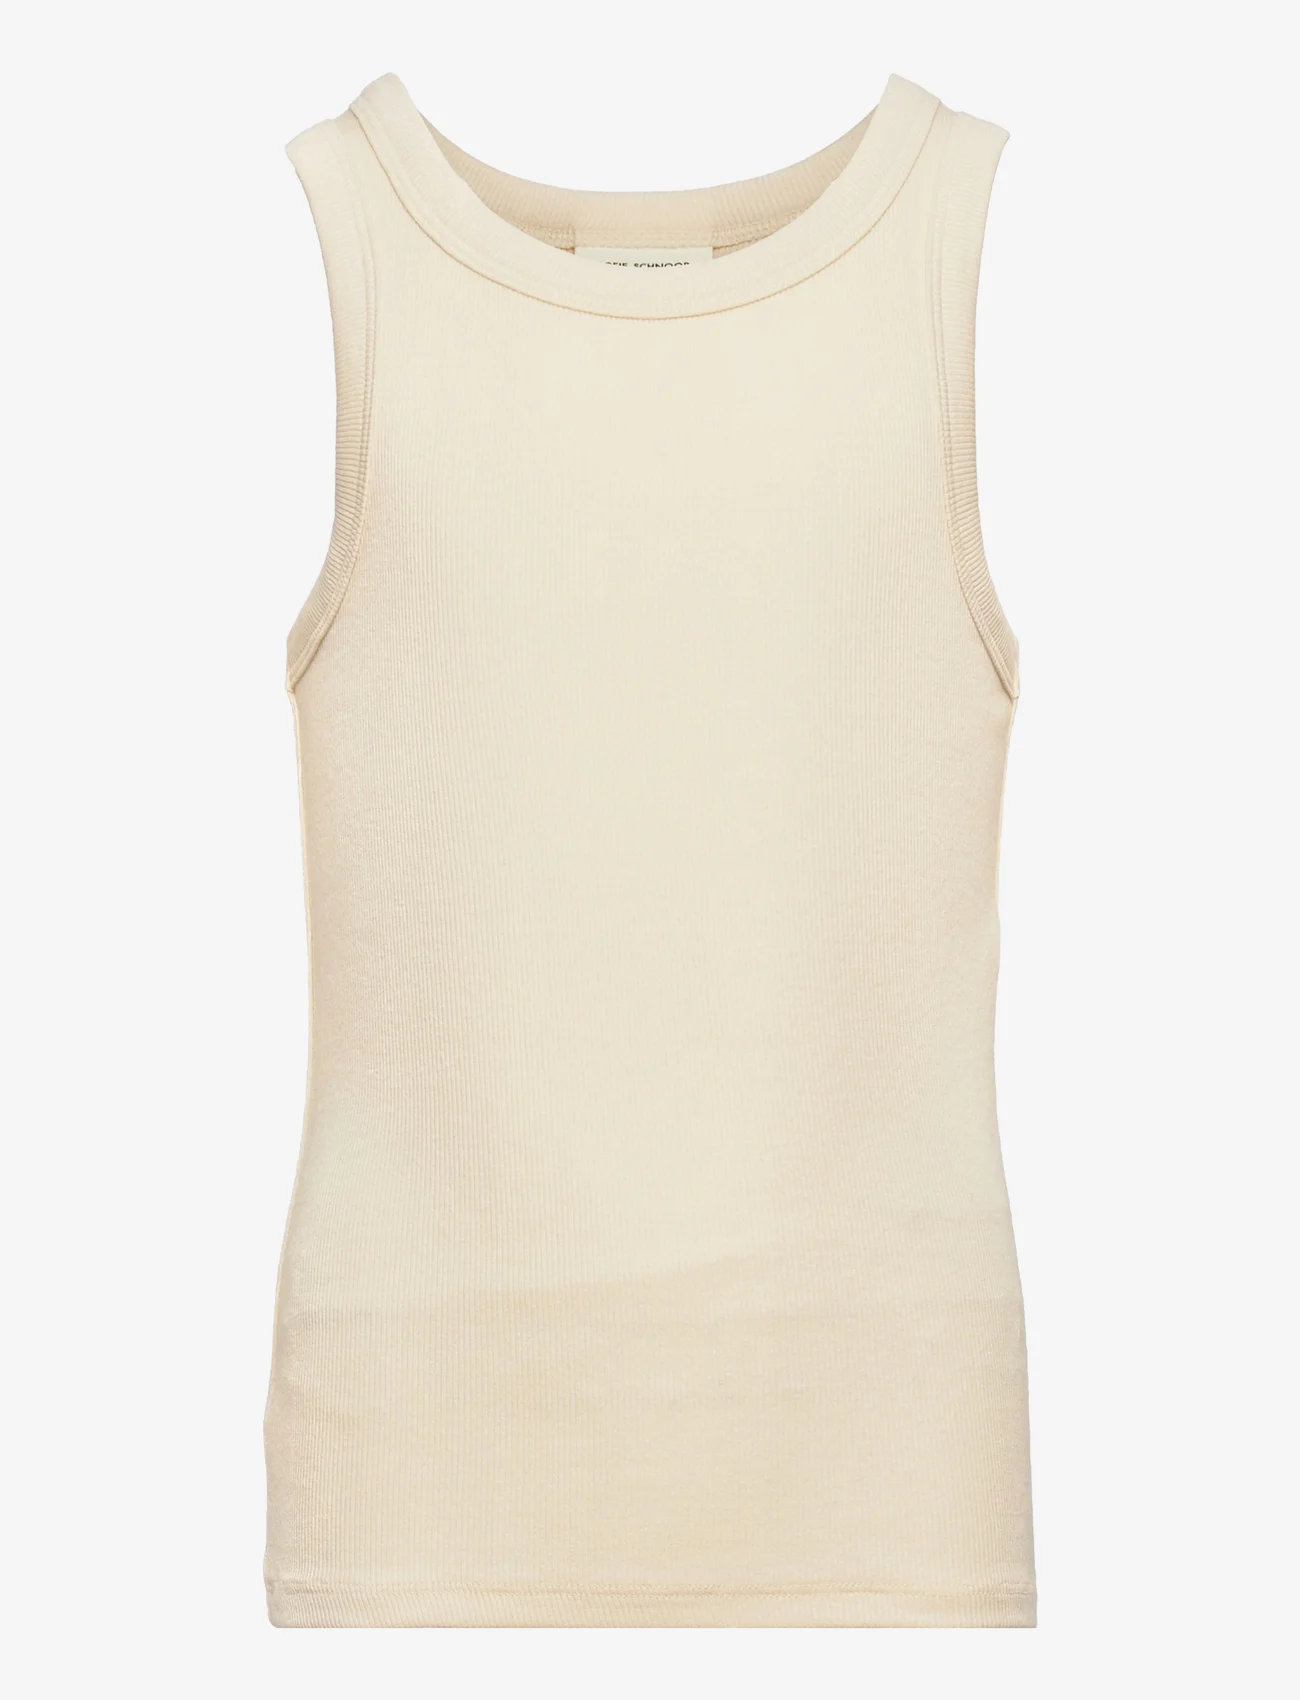 Sofie Schnoor Baby and Kids - Top - sleeveless tops - antique white - 0